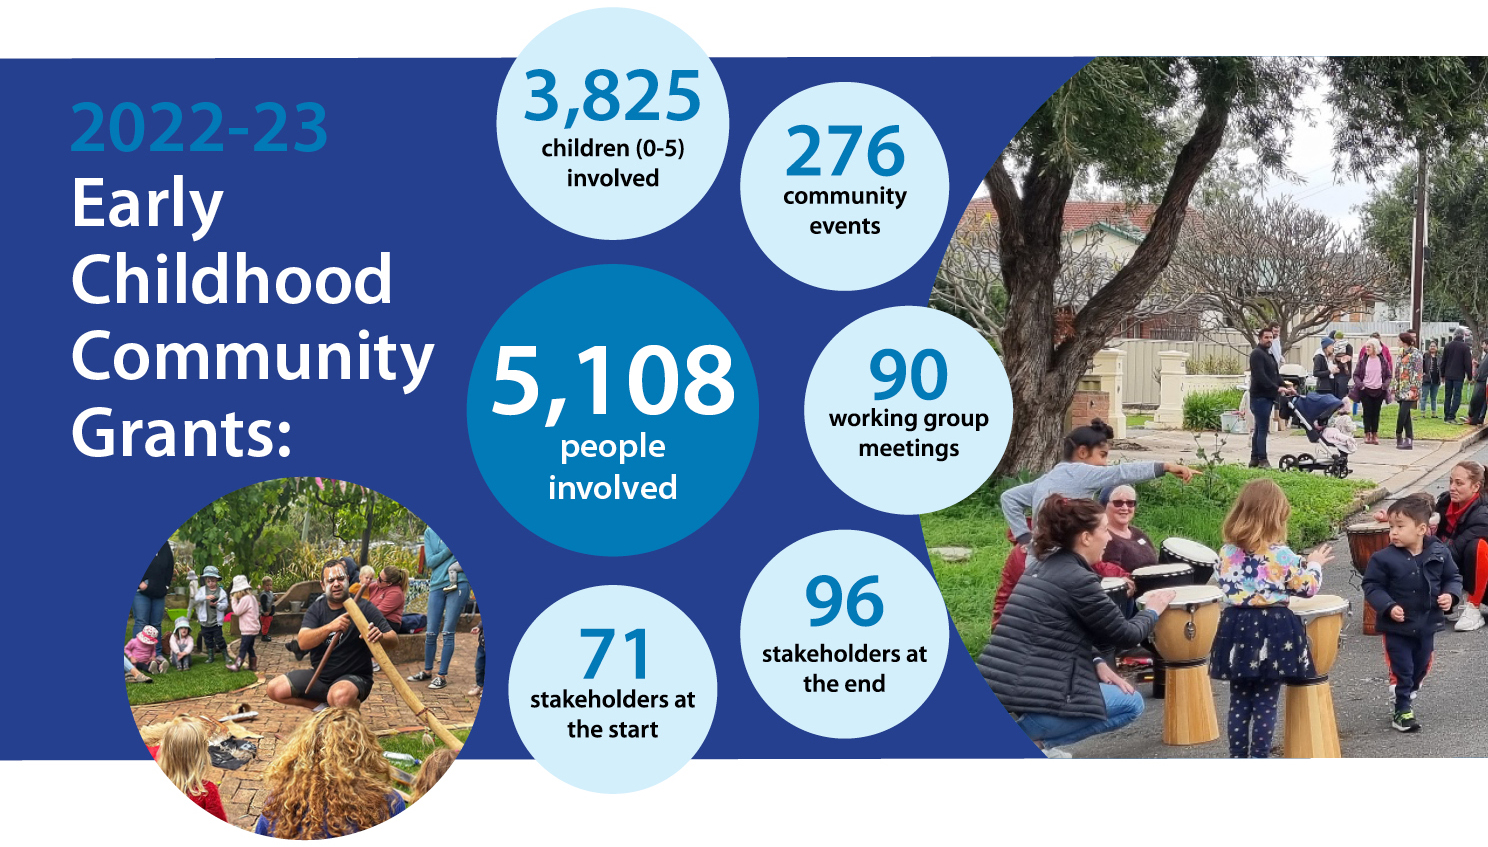 Summary infographic with key stats from the 2022-23 Early Childhood Community Grants.